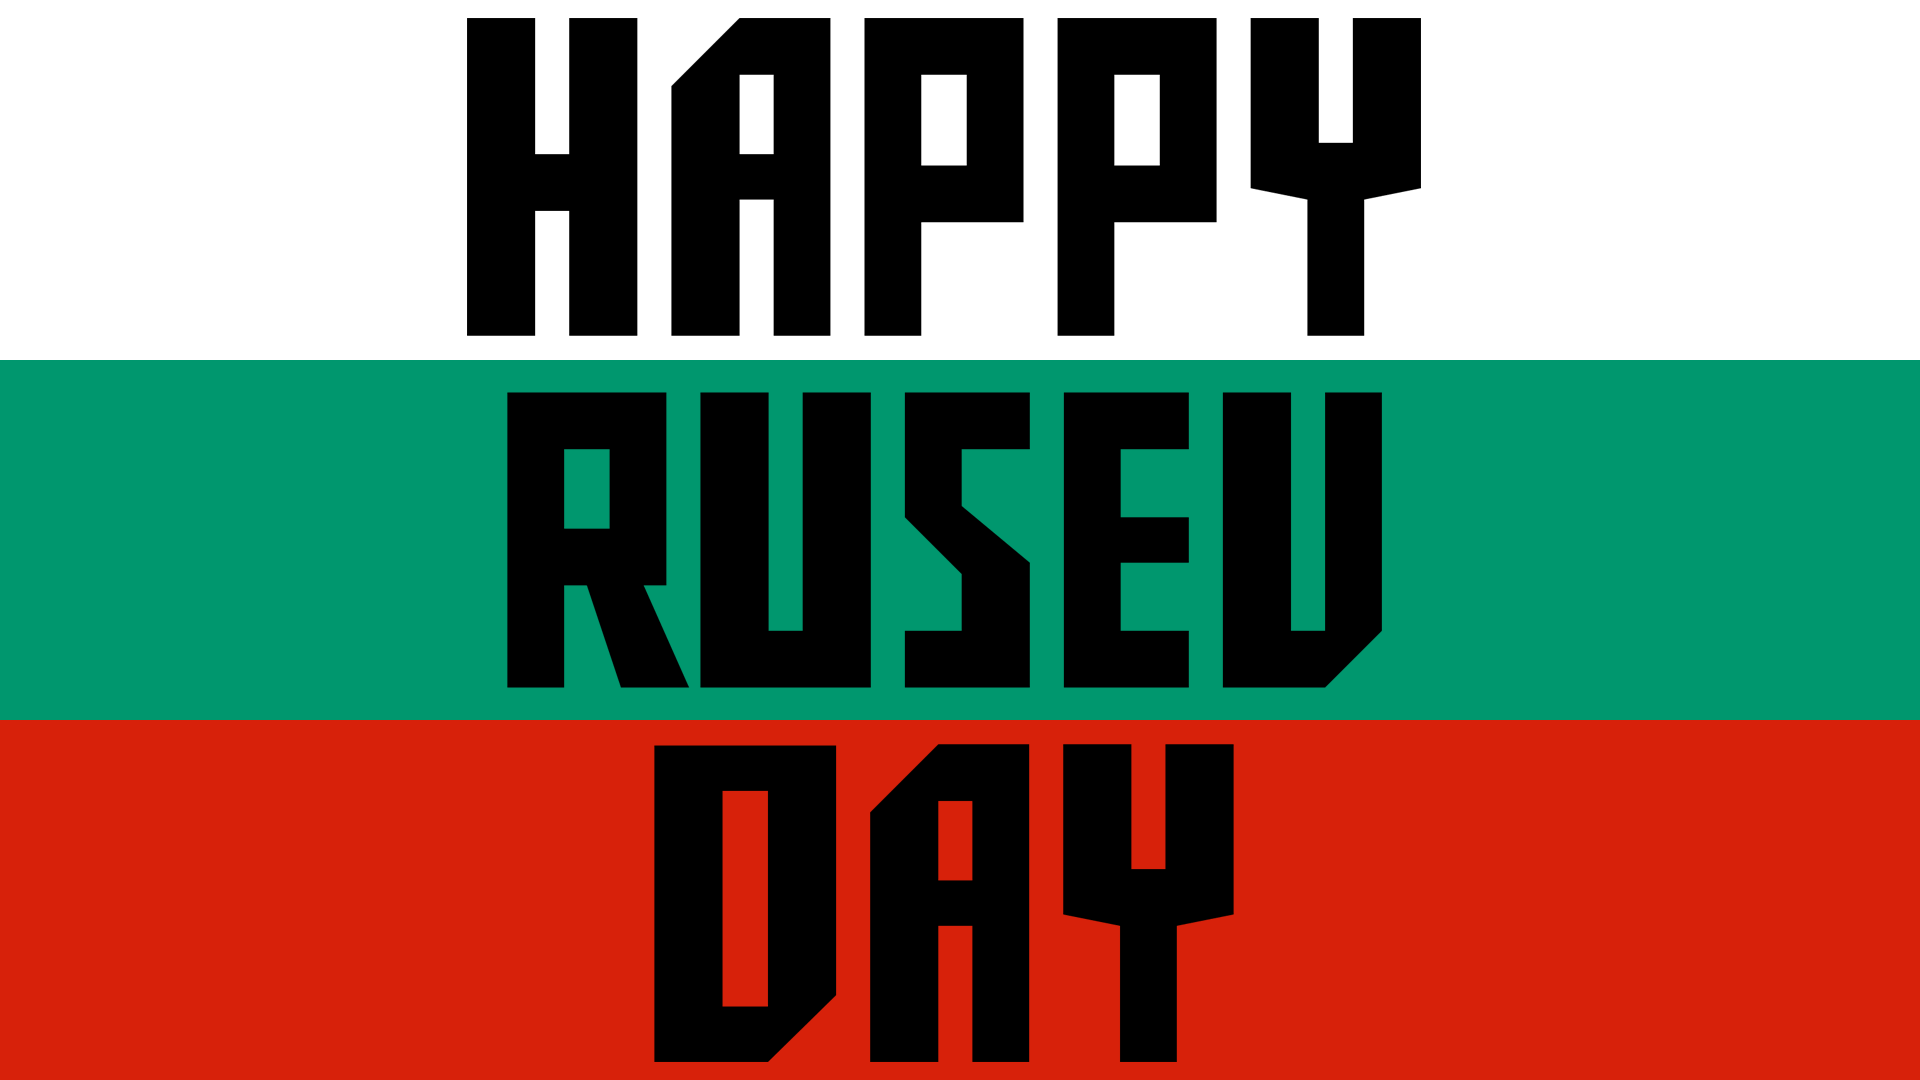 Rusev Logo - I couldn't find a good Happy Rusev Day wallpaper so I made one ...